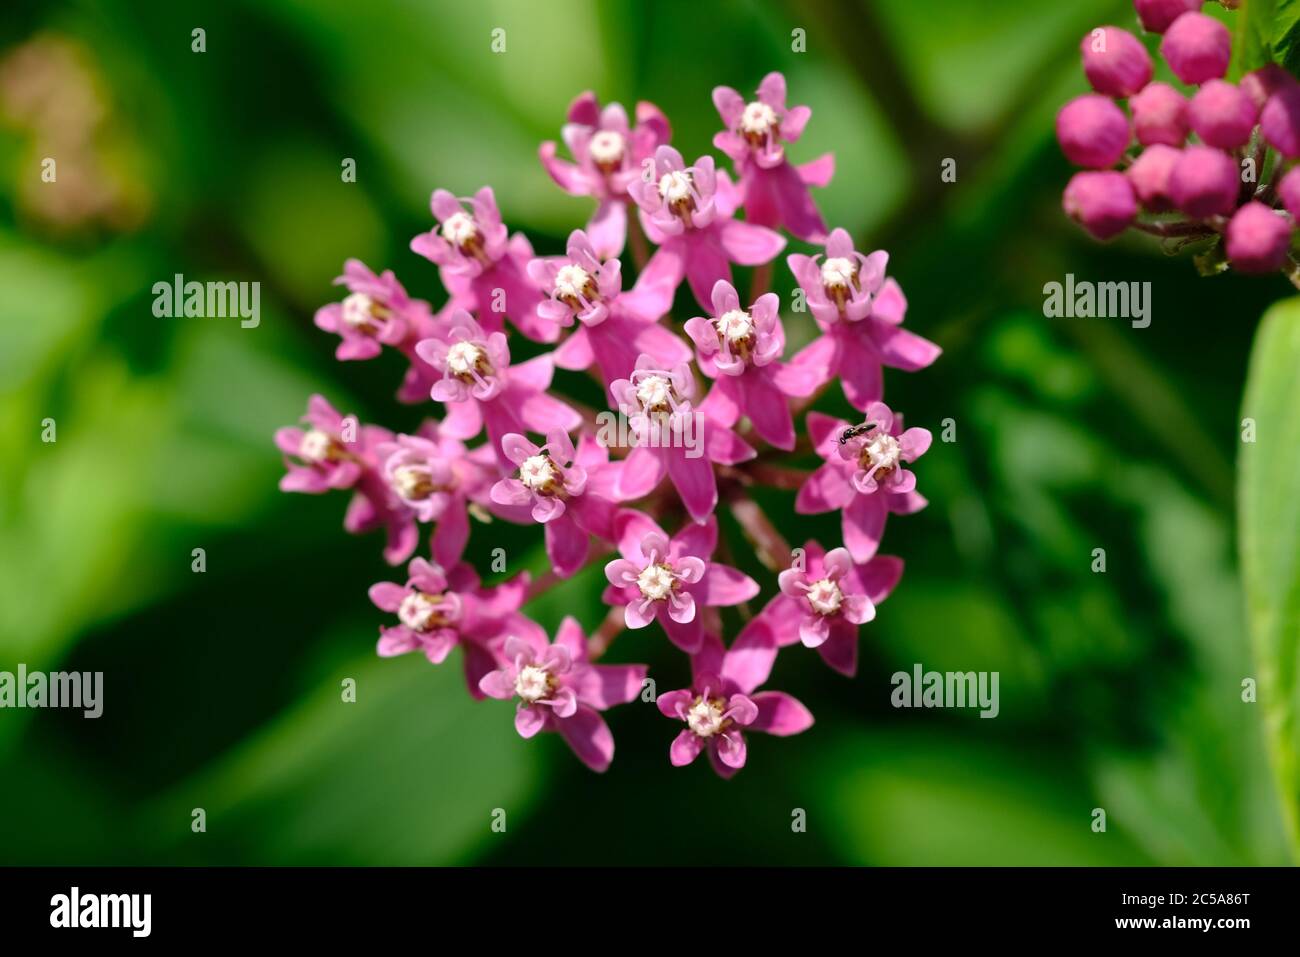 Delicate pink flowers and buds of the swamp milkweed (Asclepias incarnata) growing near a pond in Ottawa, Ontario, Canada. Stock Photo